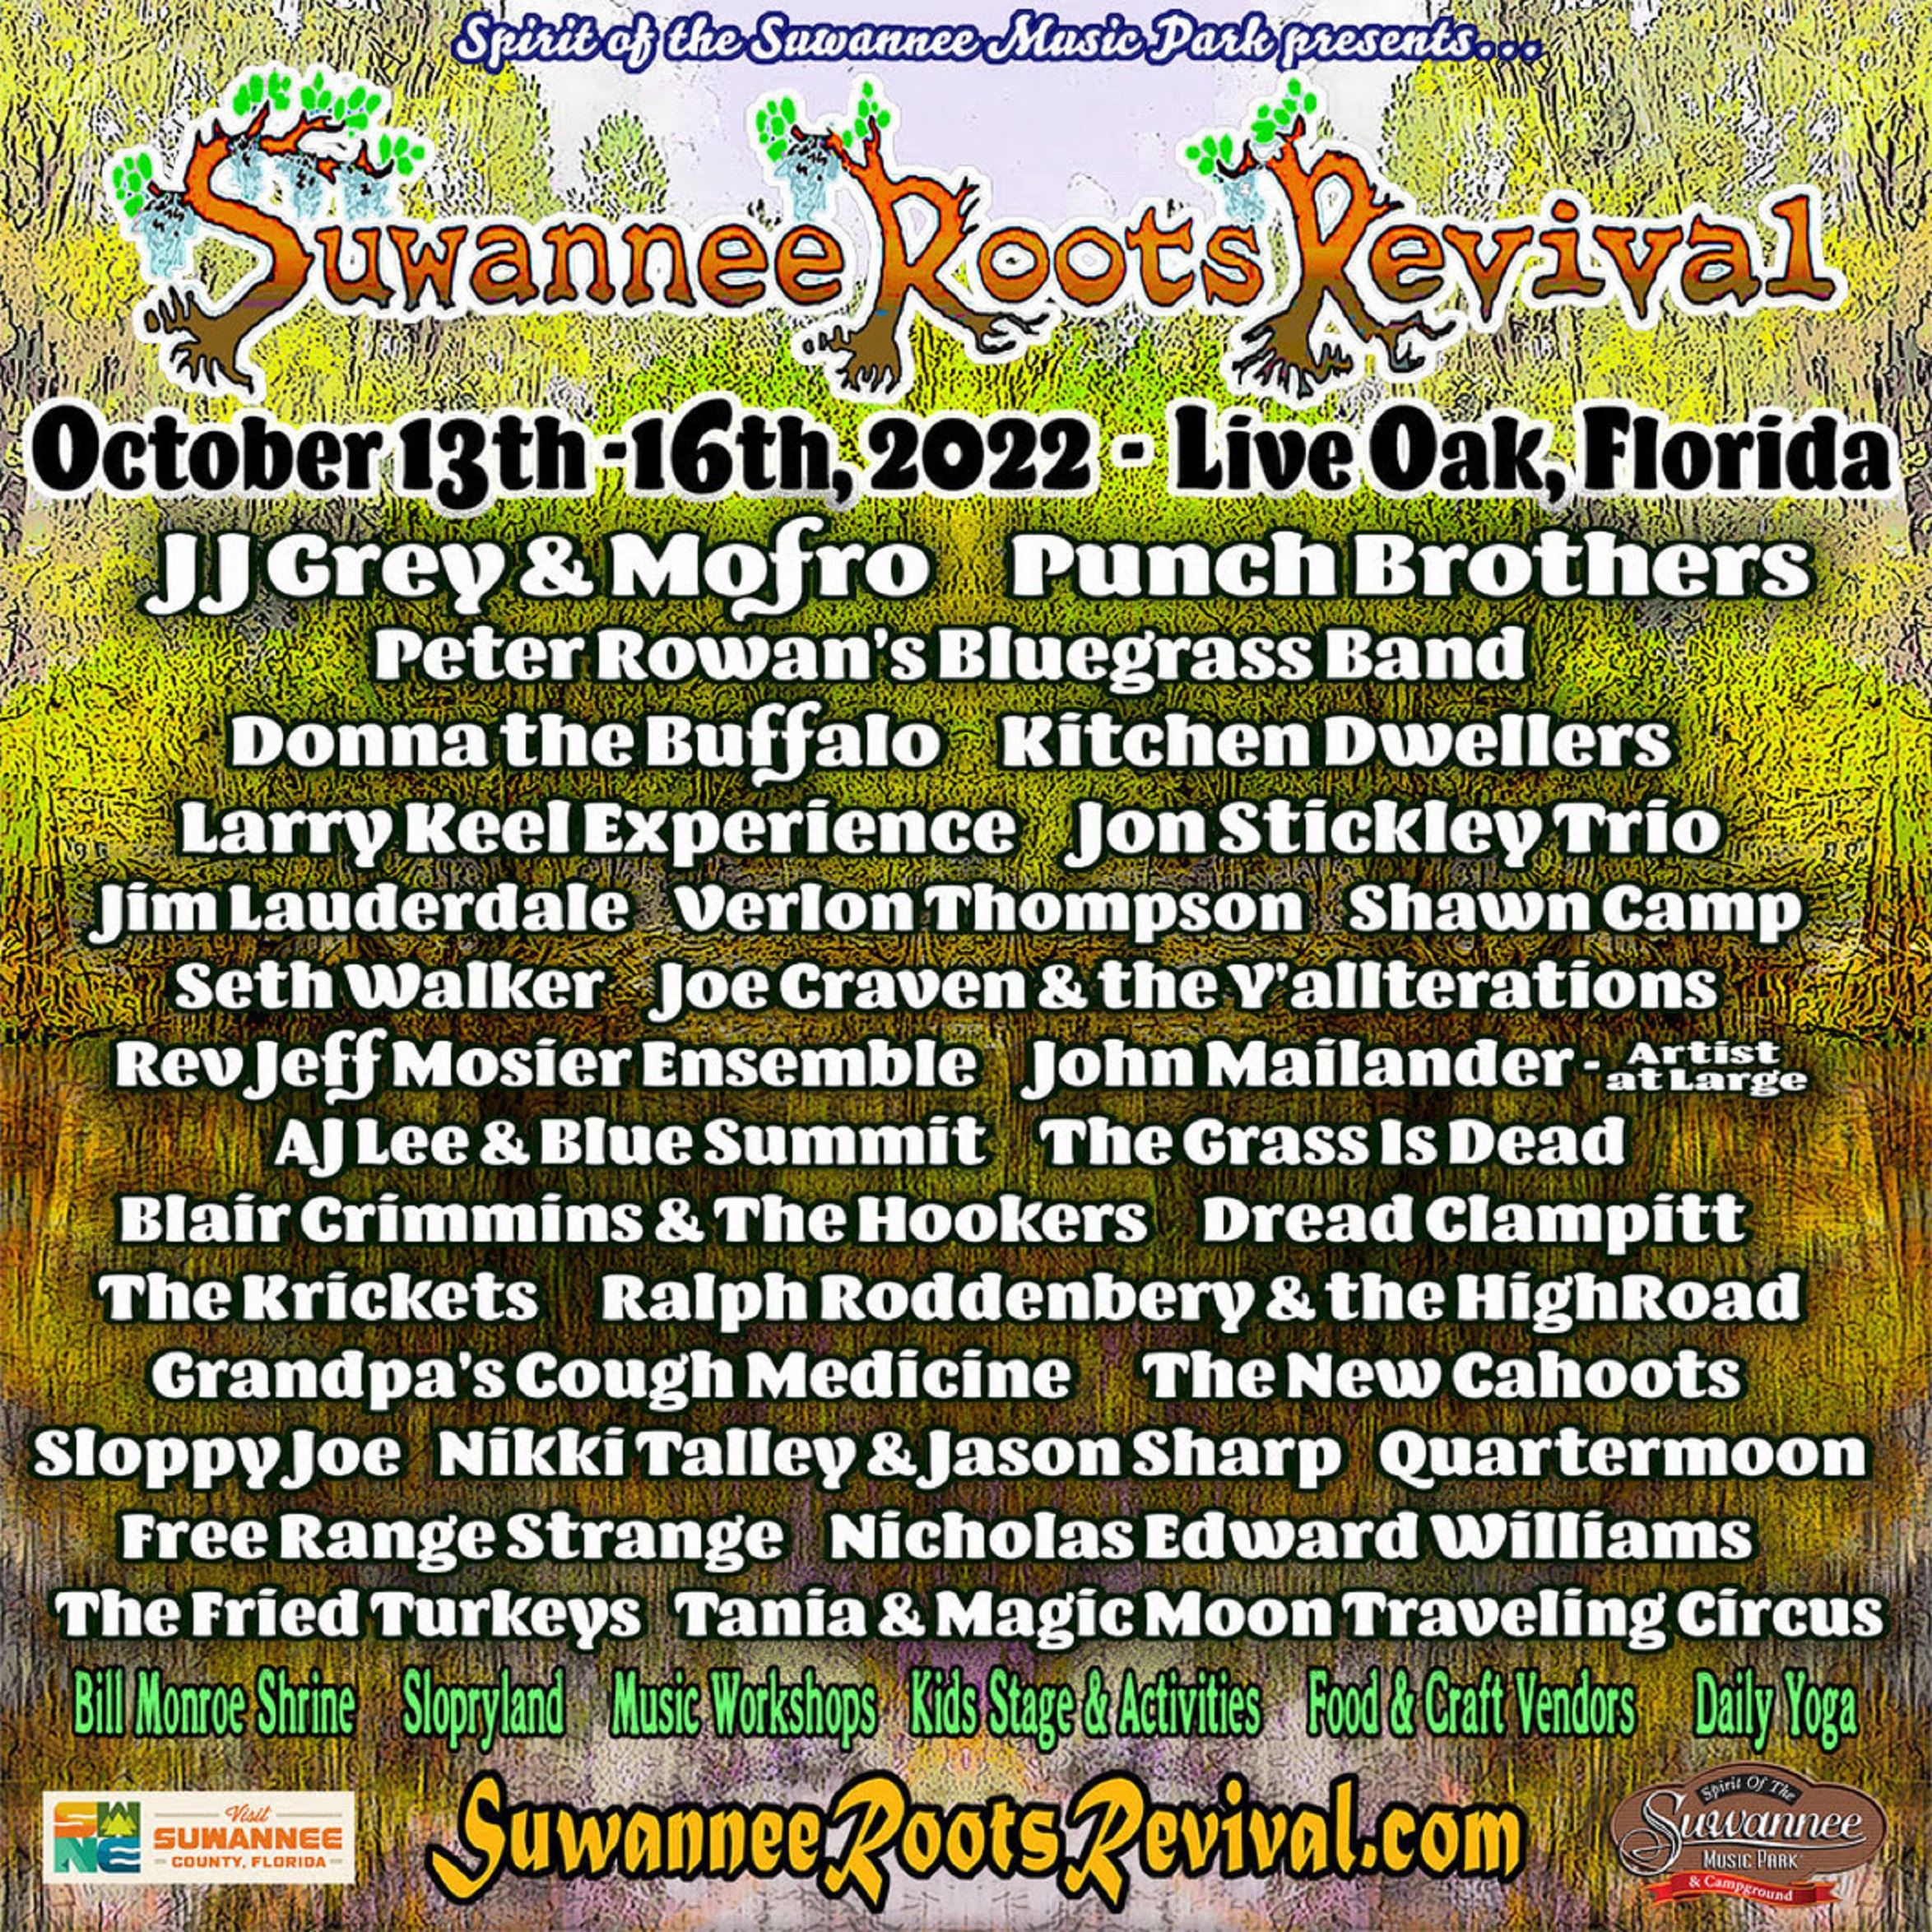 Suwannee Roots Revival Schedule is up! JJ Grey & Mofro, Punch Brothers, Peter Rowan, Donna the Buffalo